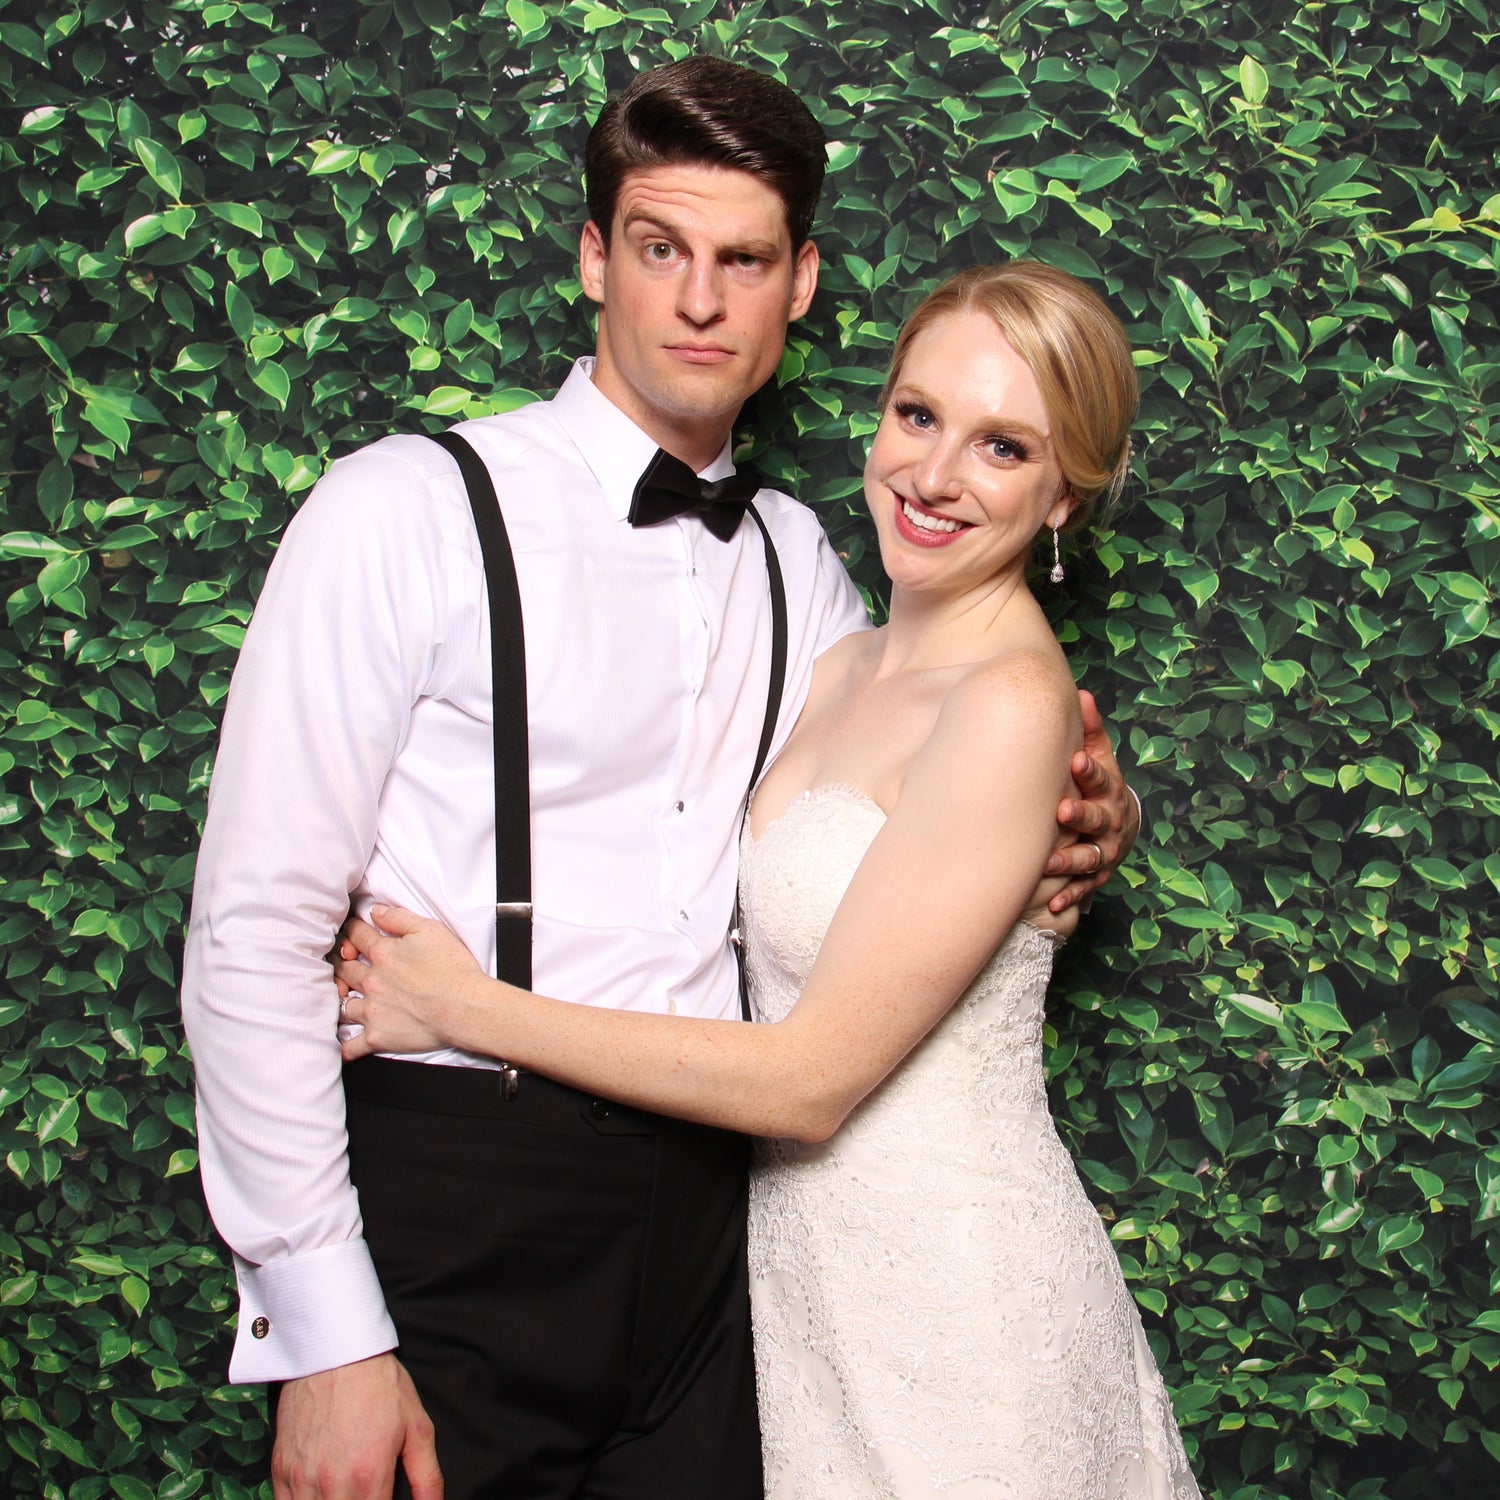 Wedding couple holding each other and posing in front of green leafy backdrop